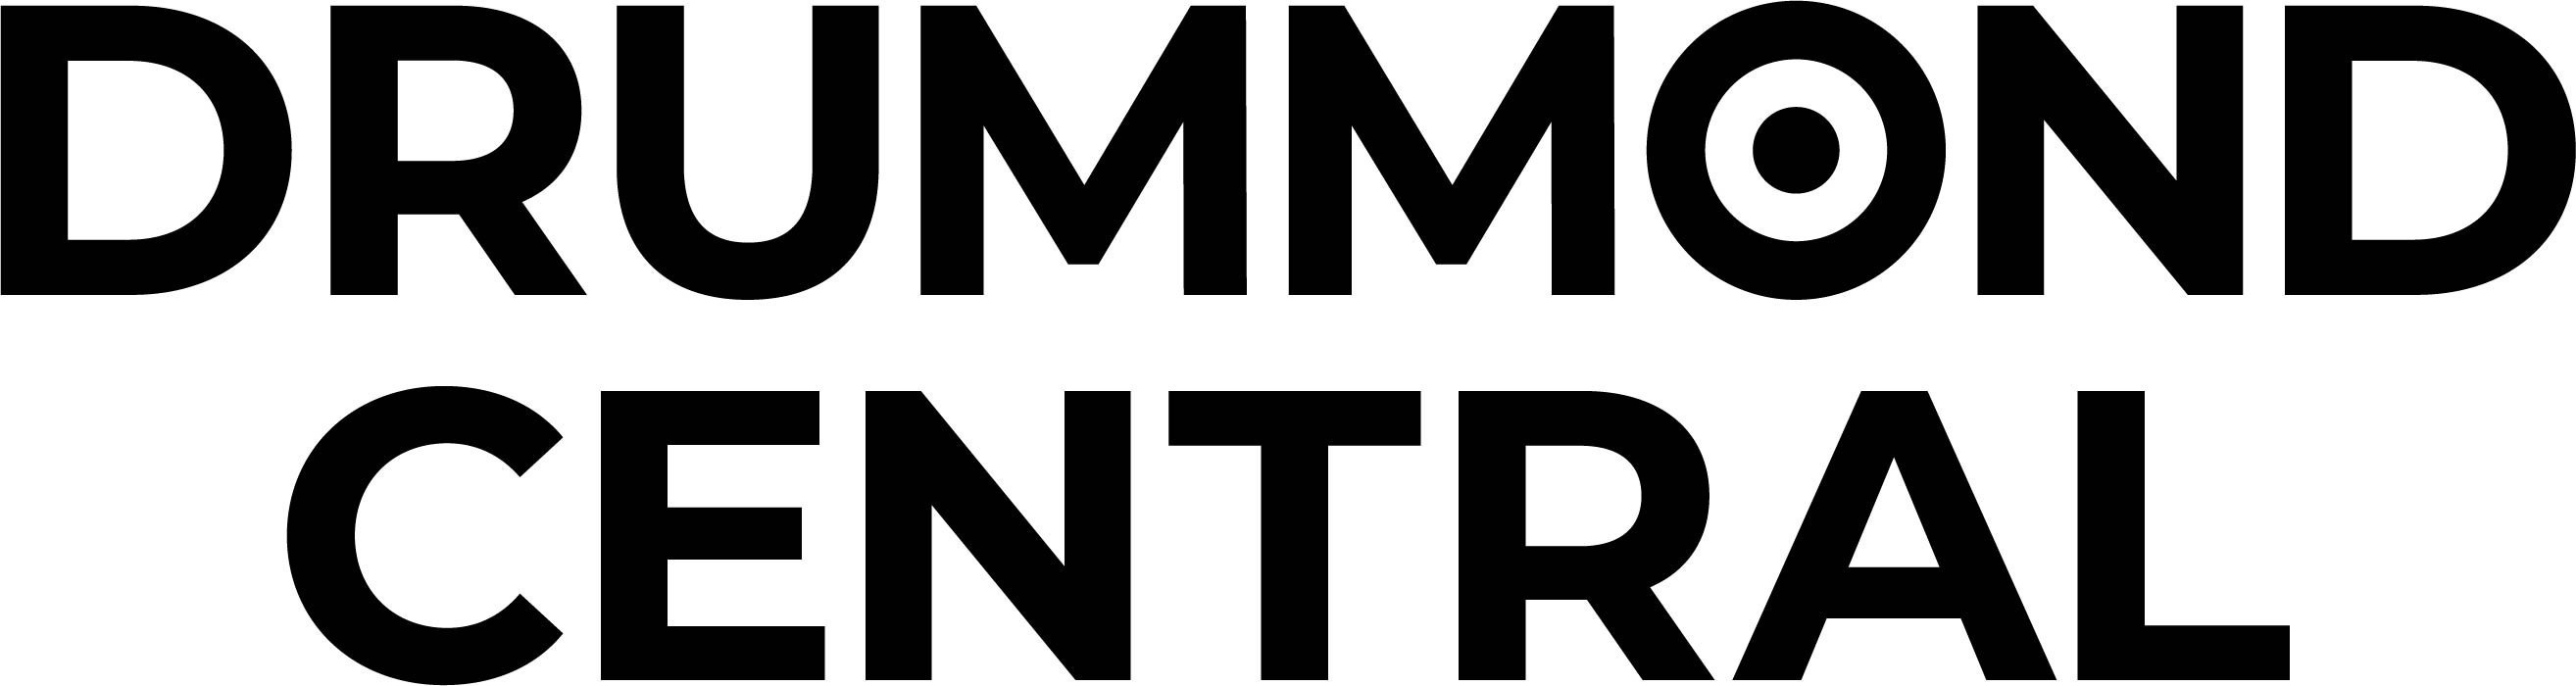 logo for Drummond Central